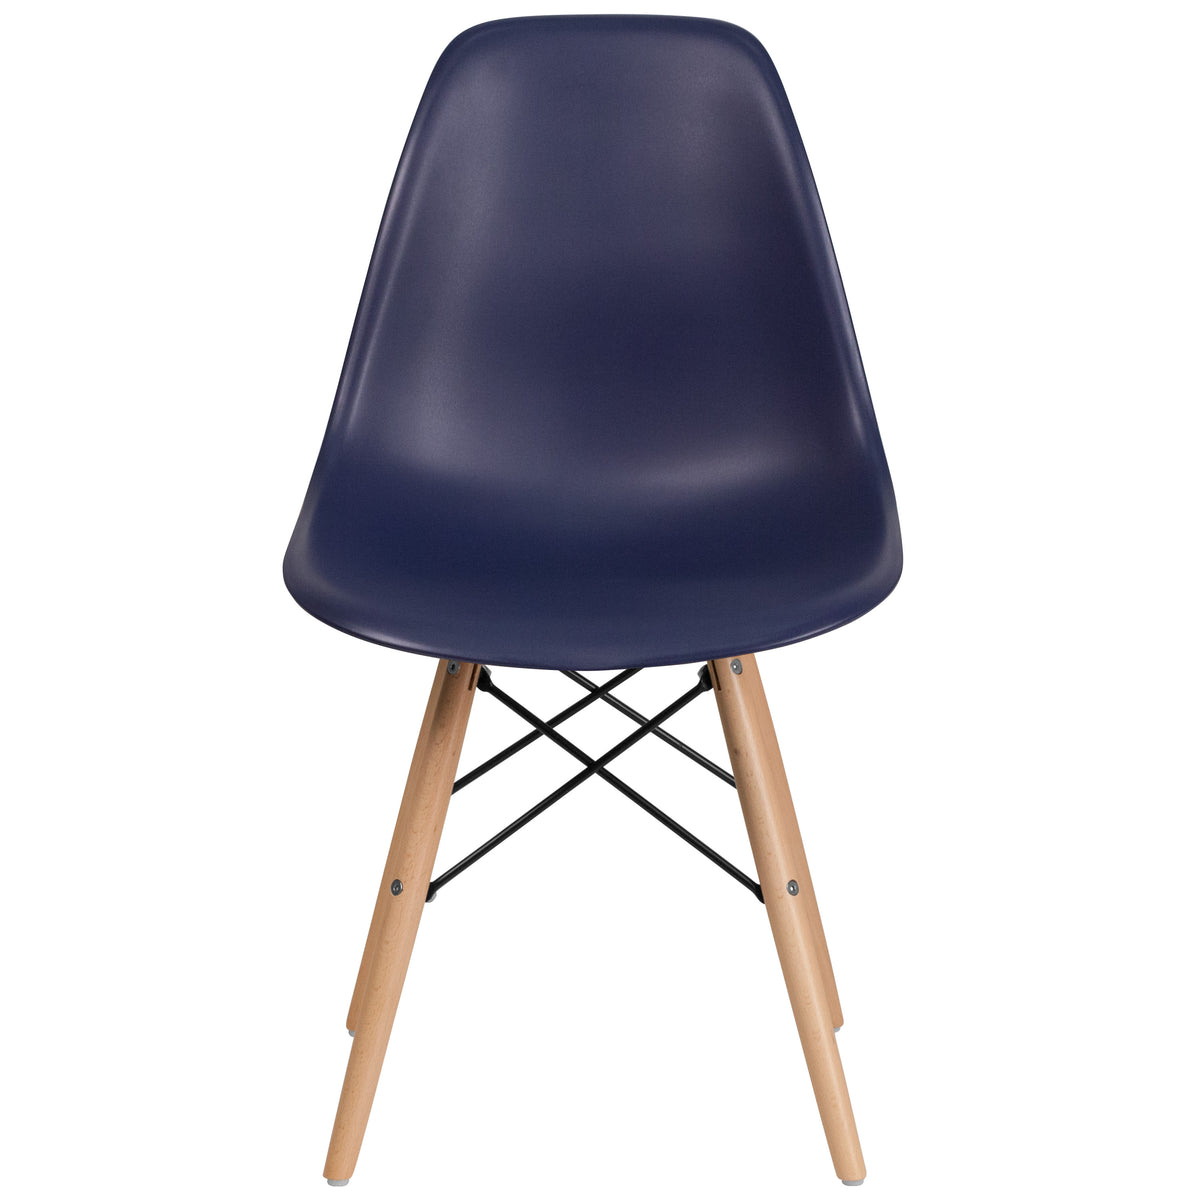 Navy |#| Navy Plastic Chair with Wooden Legs - Hospitality Seating - Side Chair